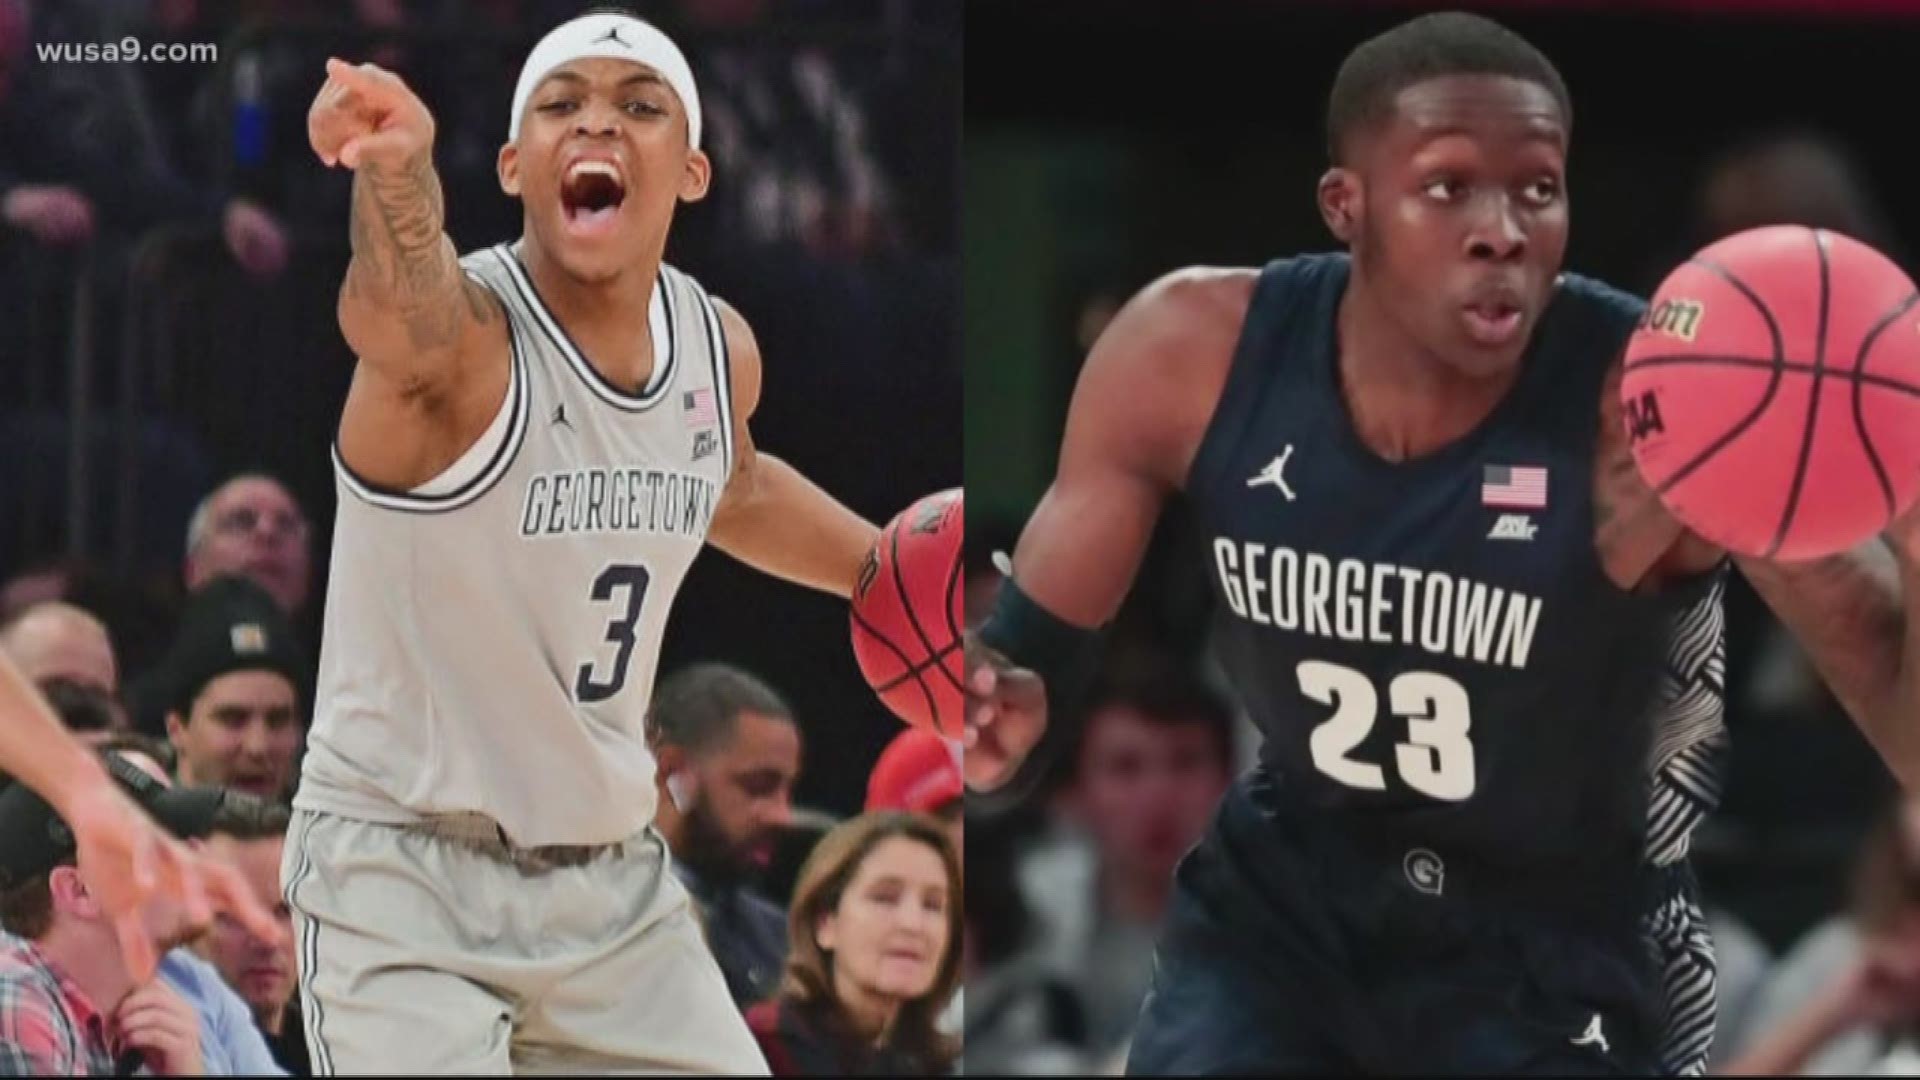 Two of Georgetown's accused basketball players to transfer